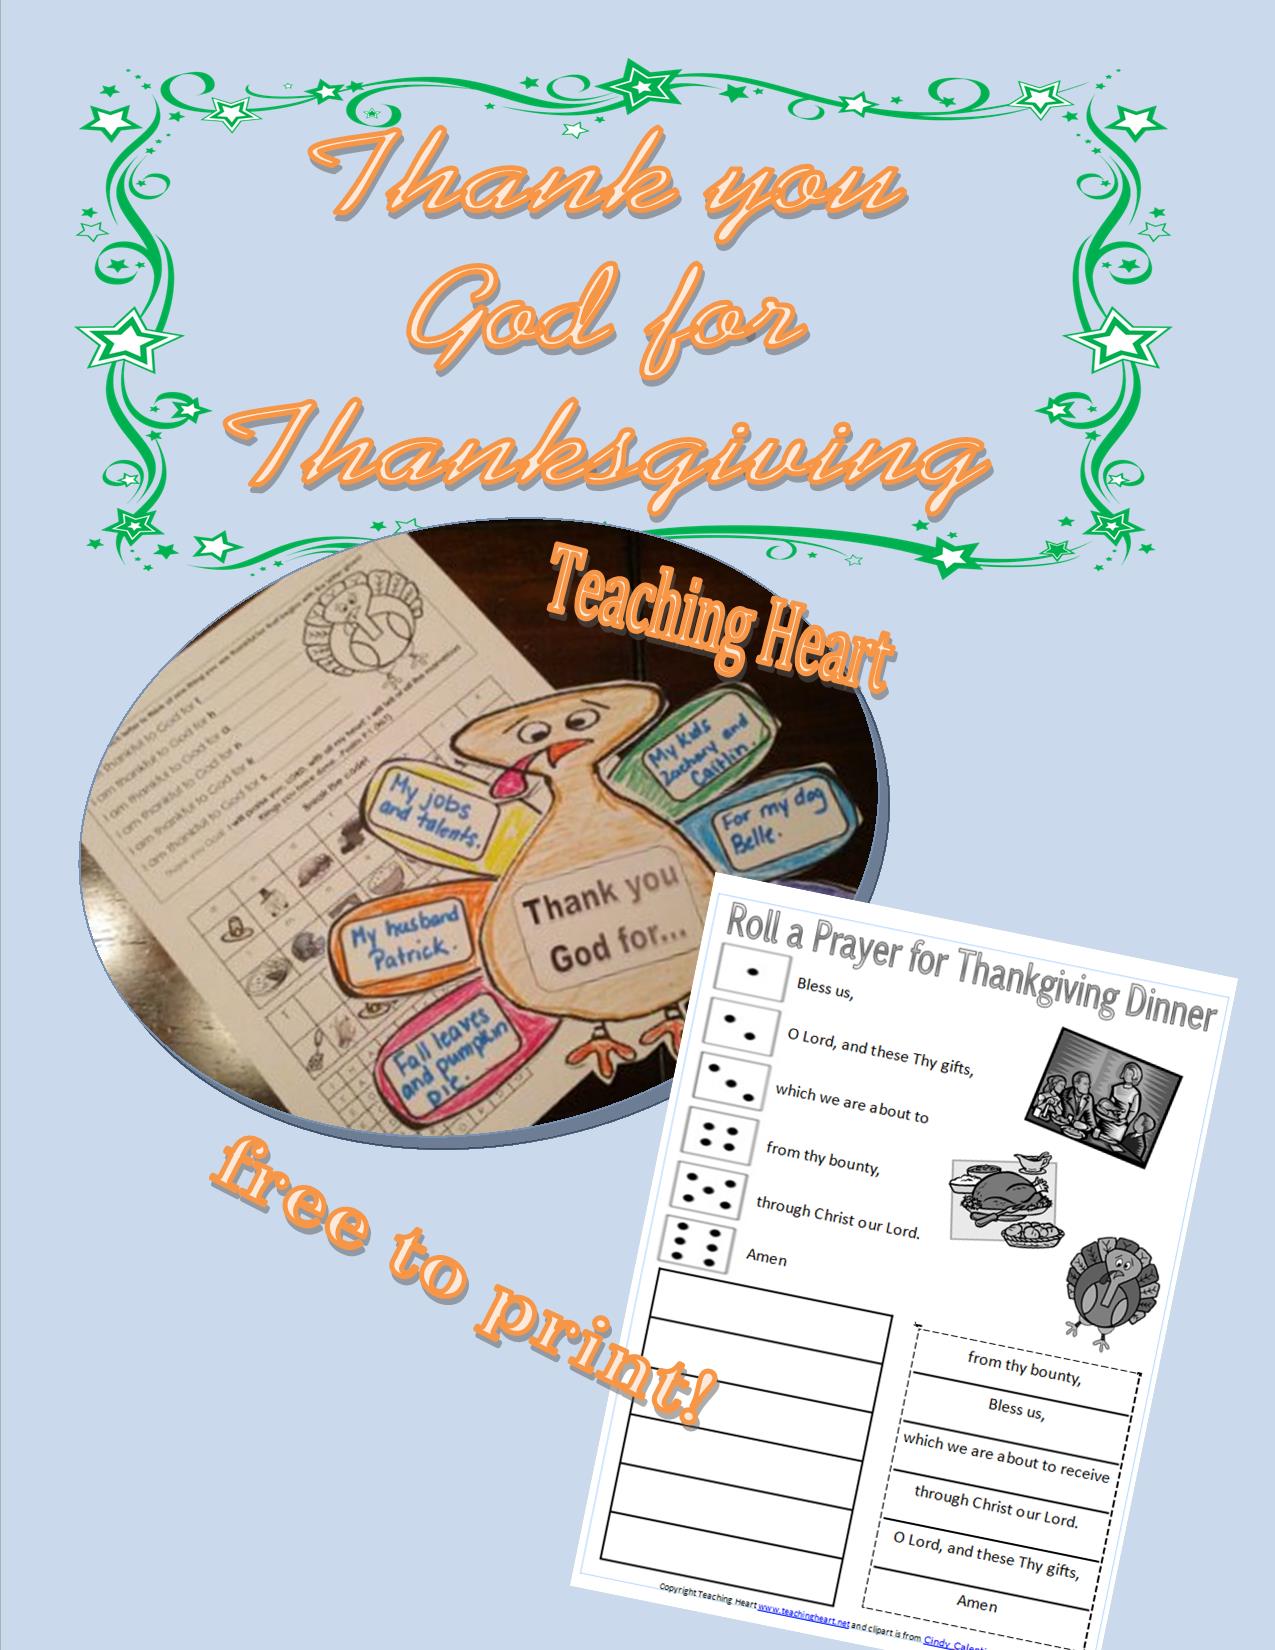 Thankgiving For God - Free to print files for a lThanksgiving CCD lesson! 